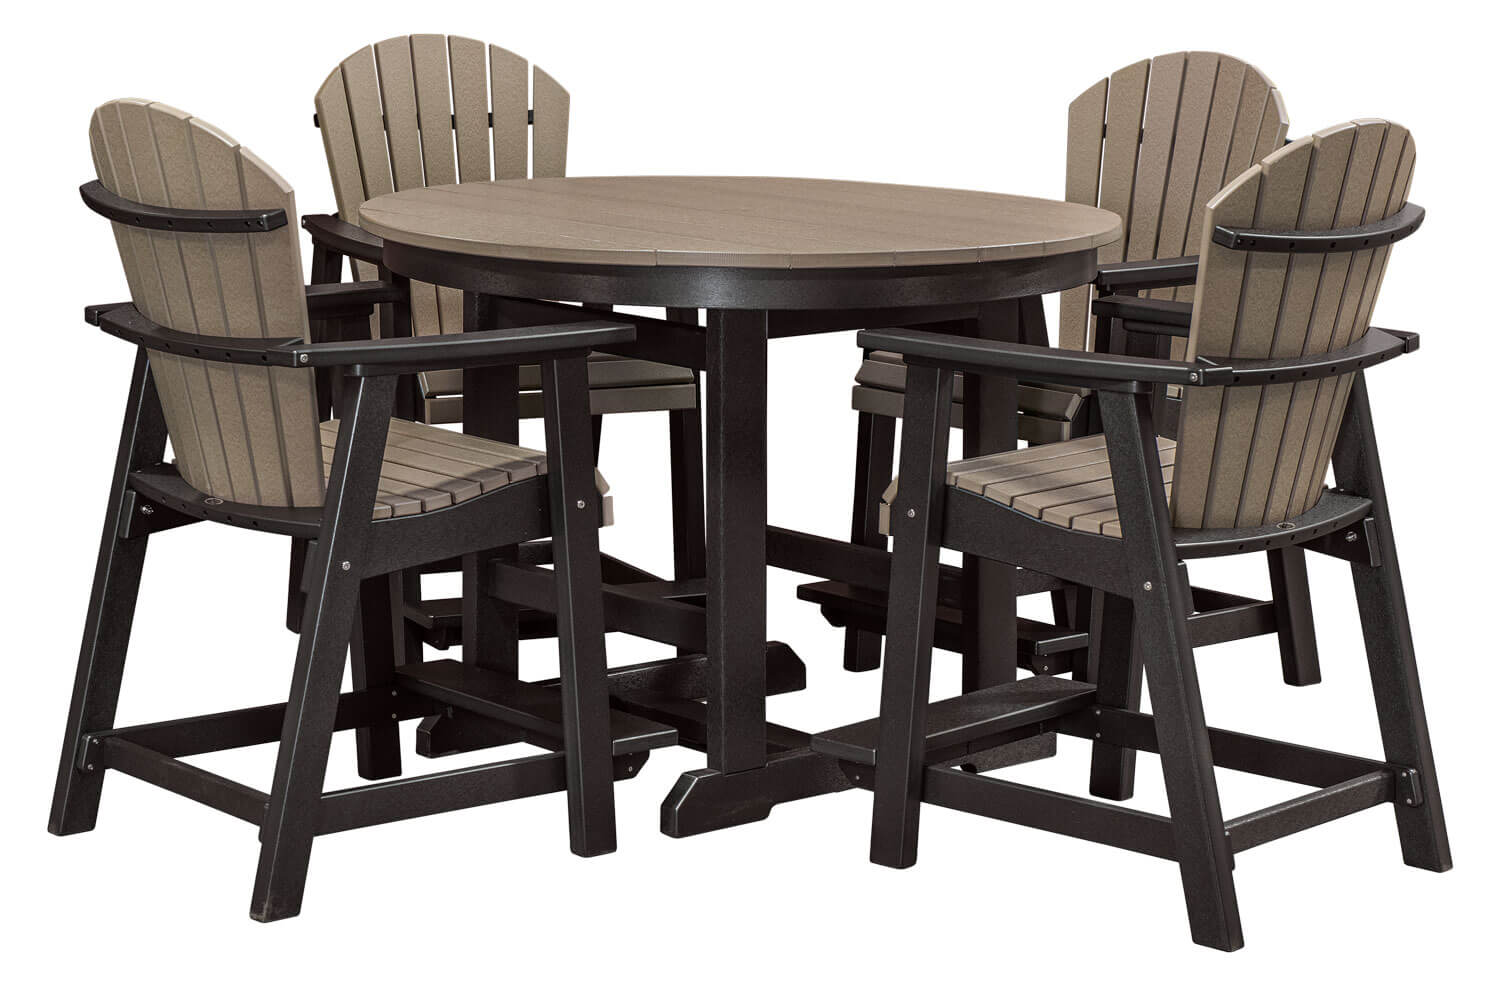 EC Woods Westbrook Outdoor Poly Counter Height Furniture Set Shown in Weathered Wood and Black